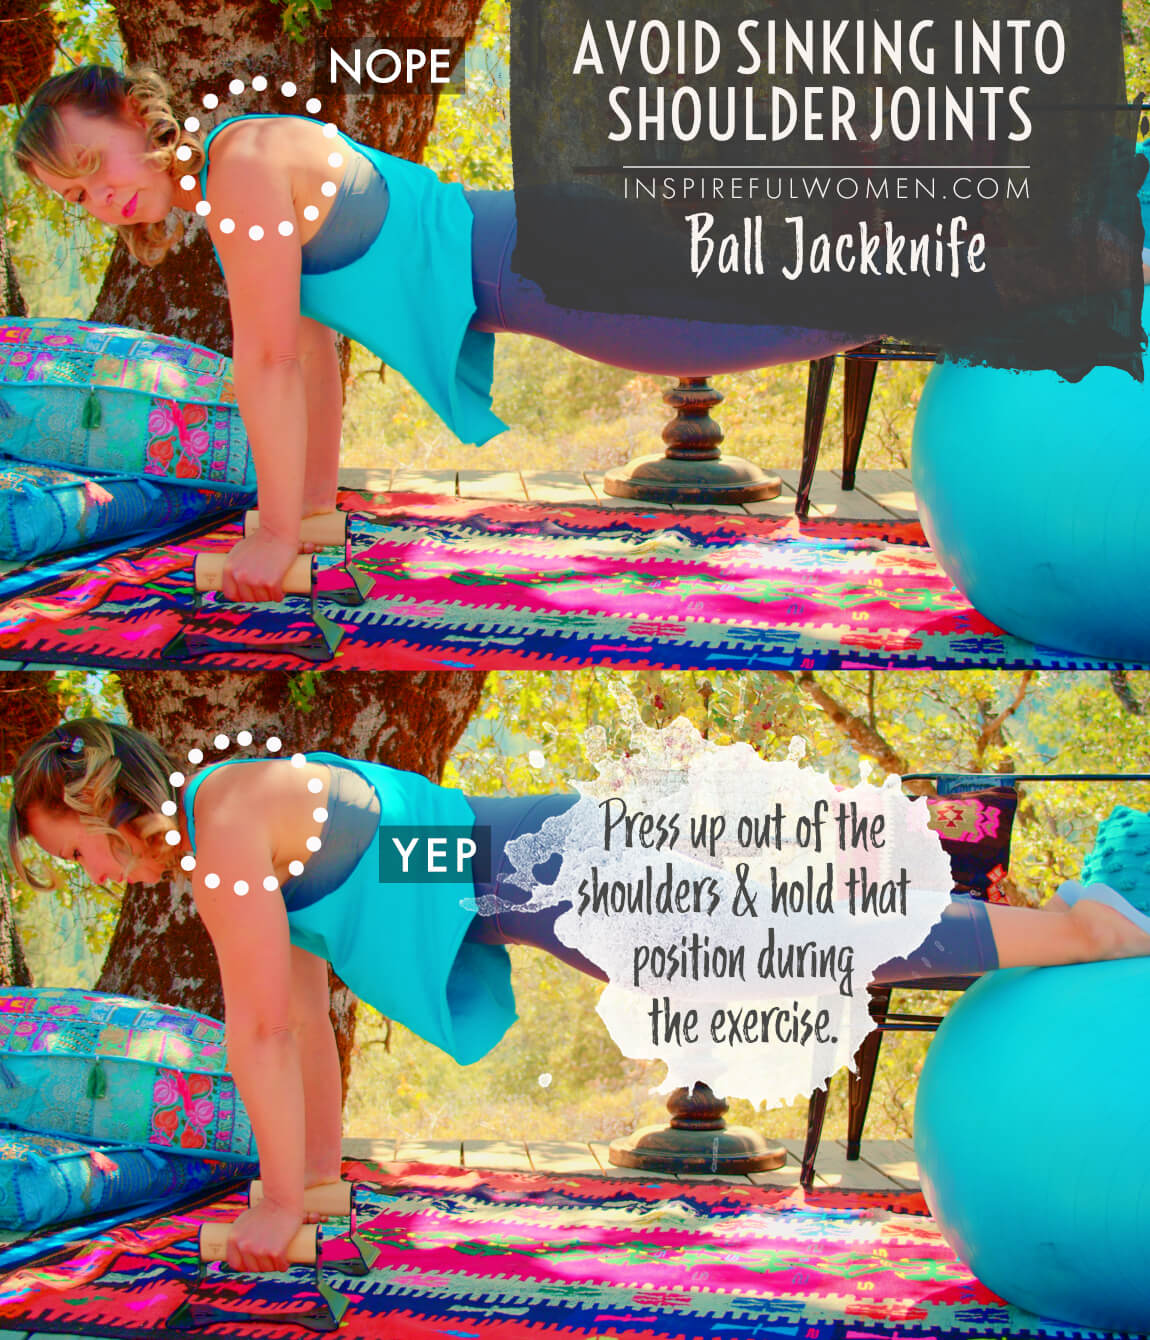 avoid-sinking-into-shoulder-joints-stability-ball-jackknife-neutral-spine-core-exercise-common-mistakes